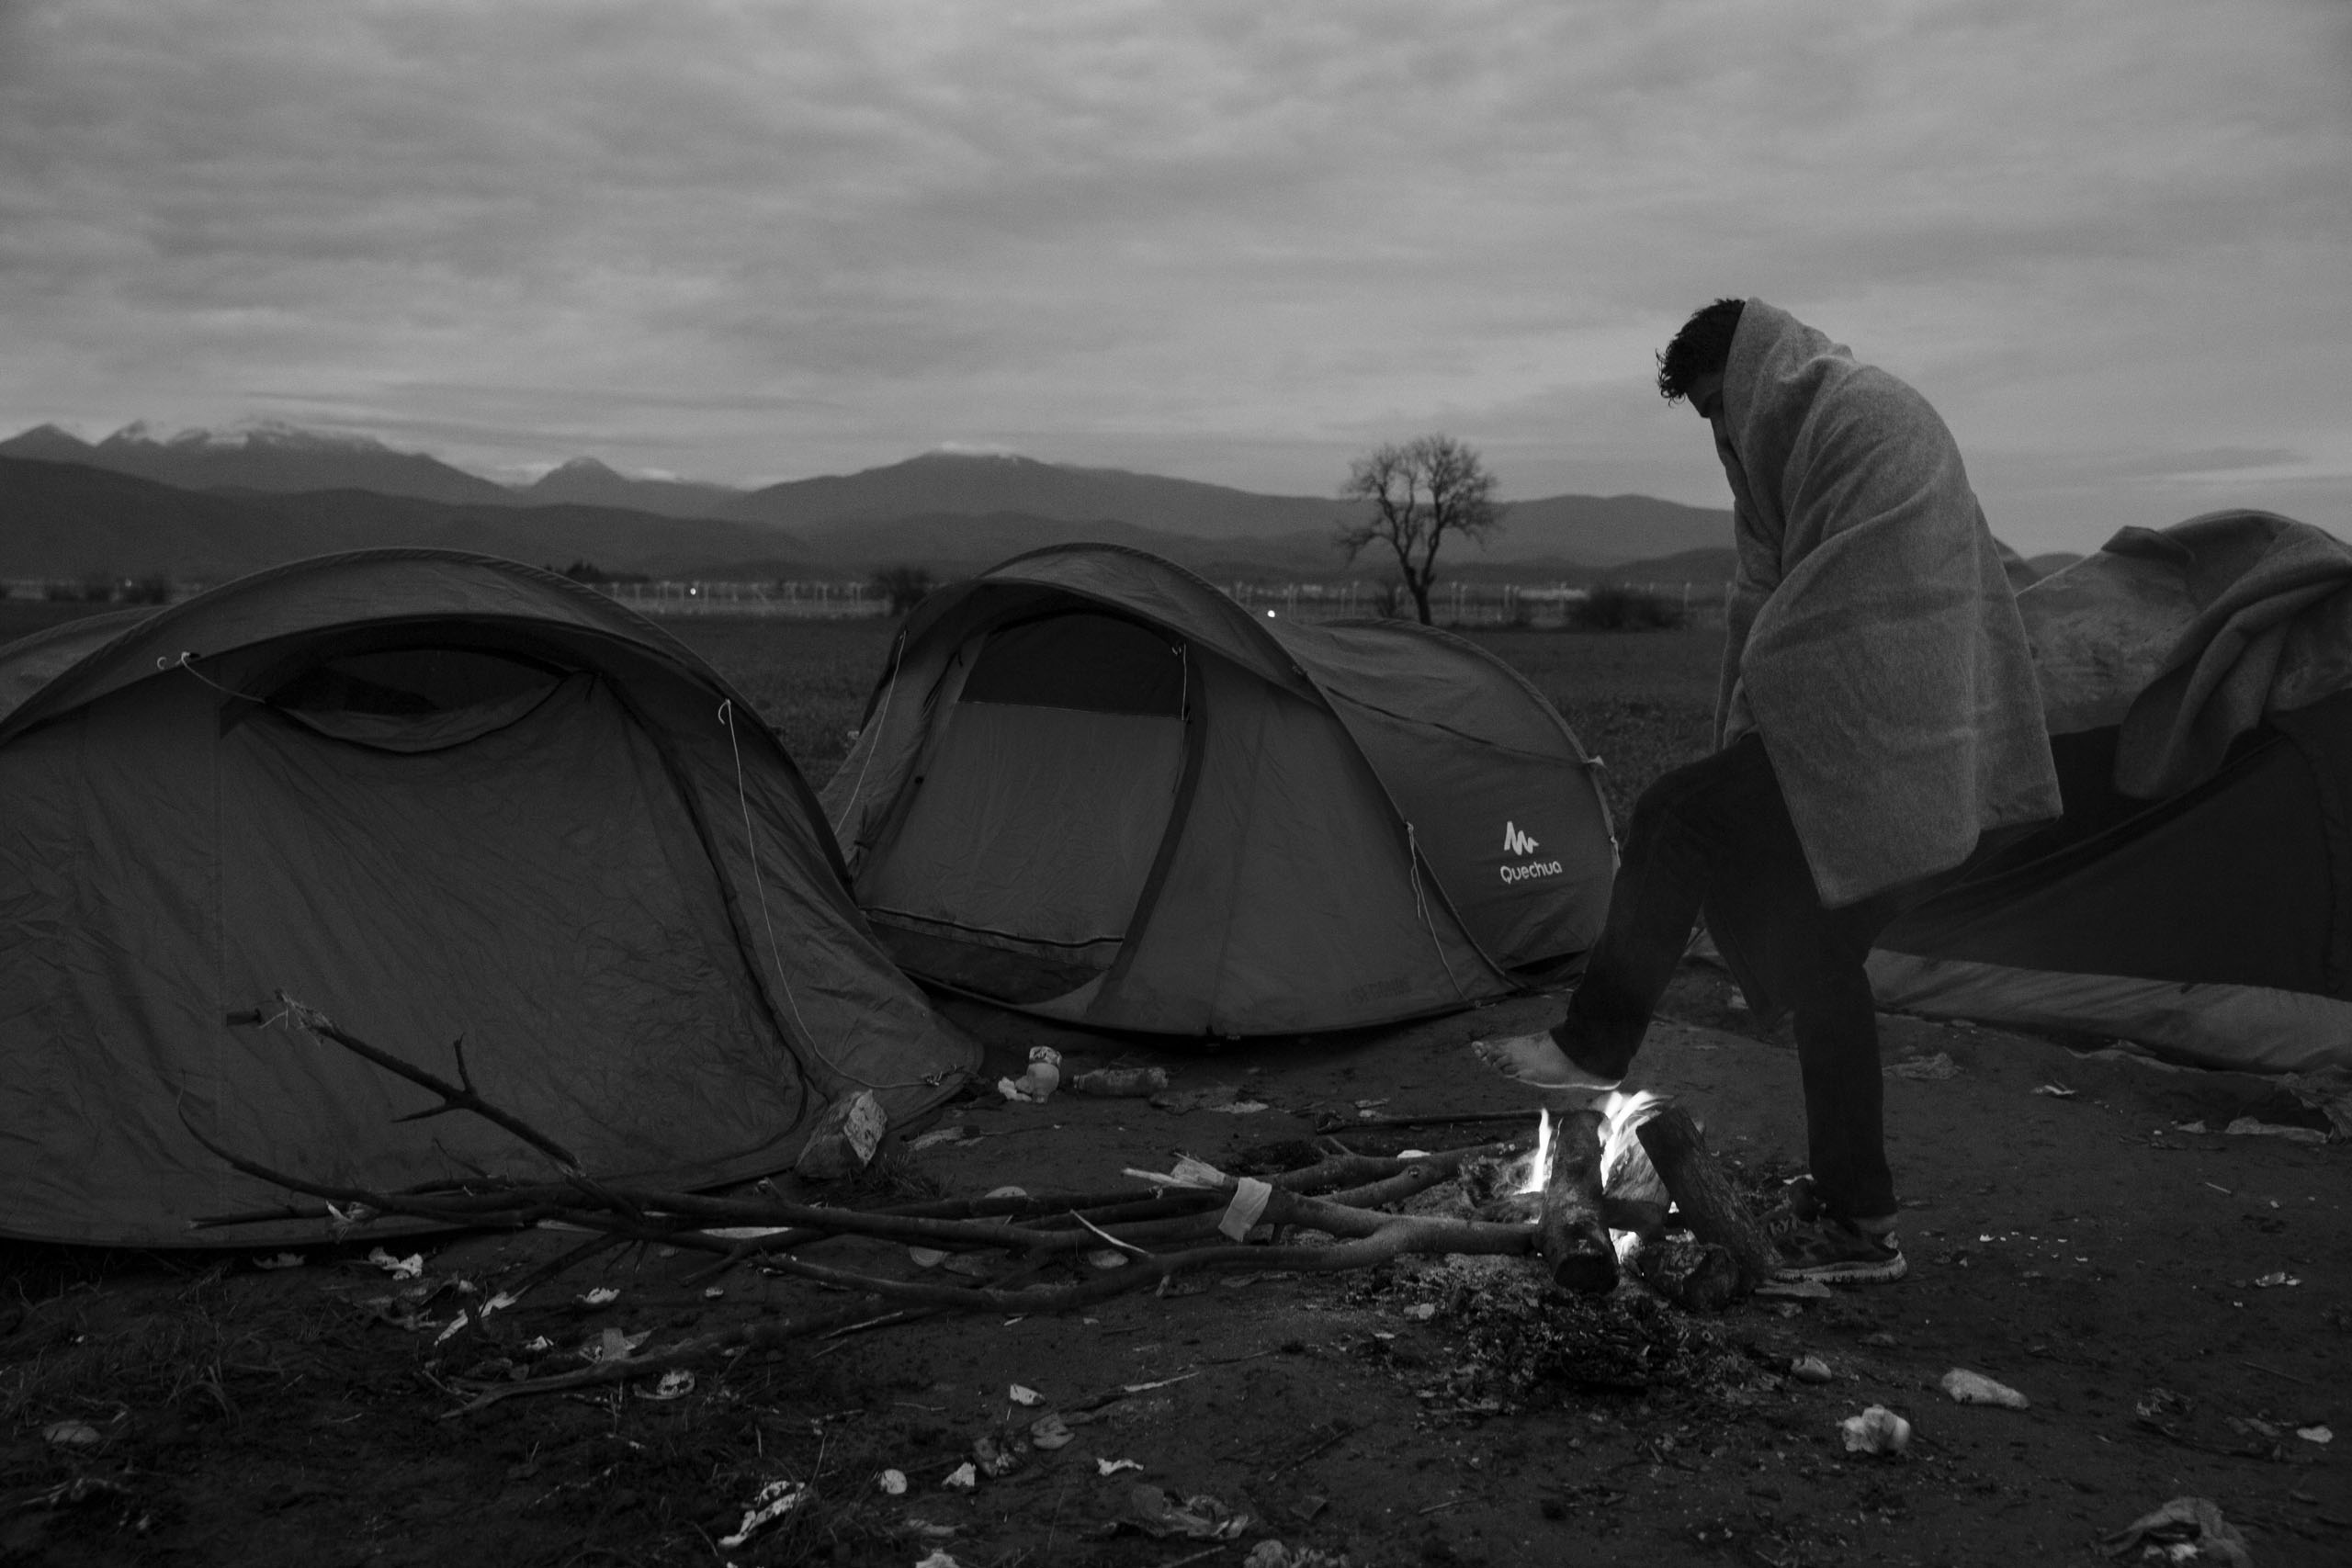 A man warms his feet at a sprawling refugee camp along the border of Greece and Macedonia near the town of Idomeni. The refugees are being stopped from moving beyond Greece and have been languishing in the rain, mud, and cold with insufficient food and medical care while sleeping in  small tents, March 12, 2016